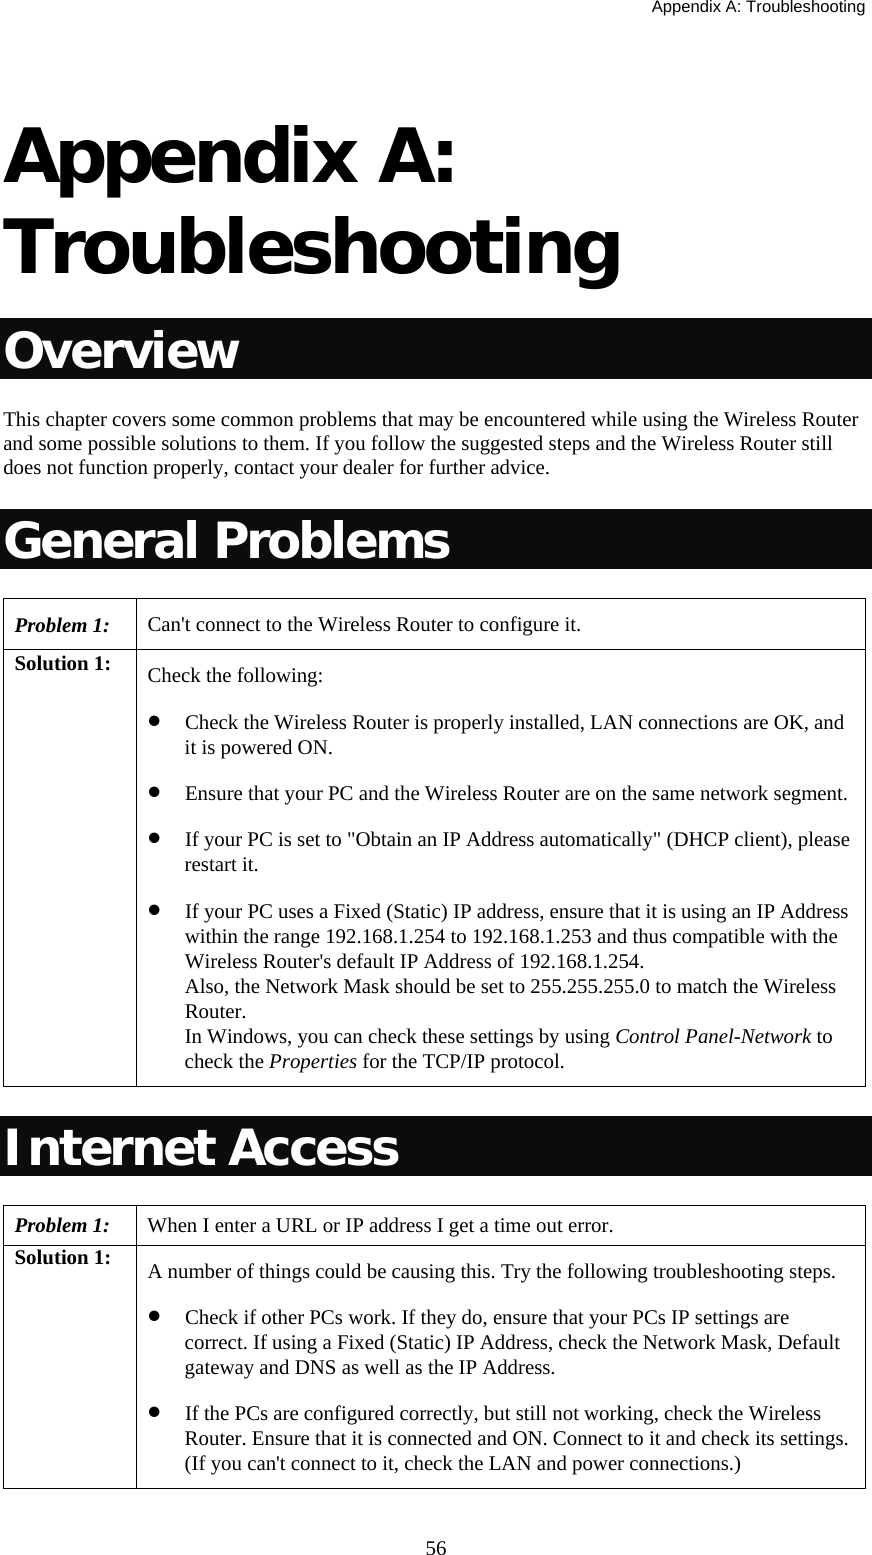   Appendix A: Troubleshooting  56 Appendix A: Troubleshooting Overview This chapter covers some common problems that may be encountered while using the Wireless Router and some possible solutions to them. If you follow the suggested steps and the Wireless Router still does not function properly, contact your dealer for further advice. General Problems Problem 1:  Can&apos;t connect to the Wireless Router to configure it. Solution 1:  Check the following: • Check the Wireless Router is properly installed, LAN connections are OK, and it is powered ON. • Ensure that your PC and the Wireless Router are on the same network segment. • If your PC is set to &quot;Obtain an IP Address automatically&quot; (DHCP client), please restart it. • If your PC uses a Fixed (Static) IP address, ensure that it is using an IP Address within the range 192.168.1.254 to 192.168.1.253 and thus compatible with the Wireless Router&apos;s default IP Address of 192.168.1.254.  Also, the Network Mask should be set to 255.255.255.0 to match the Wireless Router. In Windows, you can check these settings by using Control Panel-Network to check the Properties for the TCP/IP protocol.  Internet Access Problem 1: When I enter a URL or IP address I get a time out error. Solution 1:  A number of things could be causing this. Try the following troubleshooting steps. • Check if other PCs work. If they do, ensure that your PCs IP settings are correct. If using a Fixed (Static) IP Address, check the Network Mask, Default gateway and DNS as well as the IP Address. • If the PCs are configured correctly, but still not working, check the Wireless Router. Ensure that it is connected and ON. Connect to it and check its settings. (If you can&apos;t connect to it, check the LAN and power connections.) 